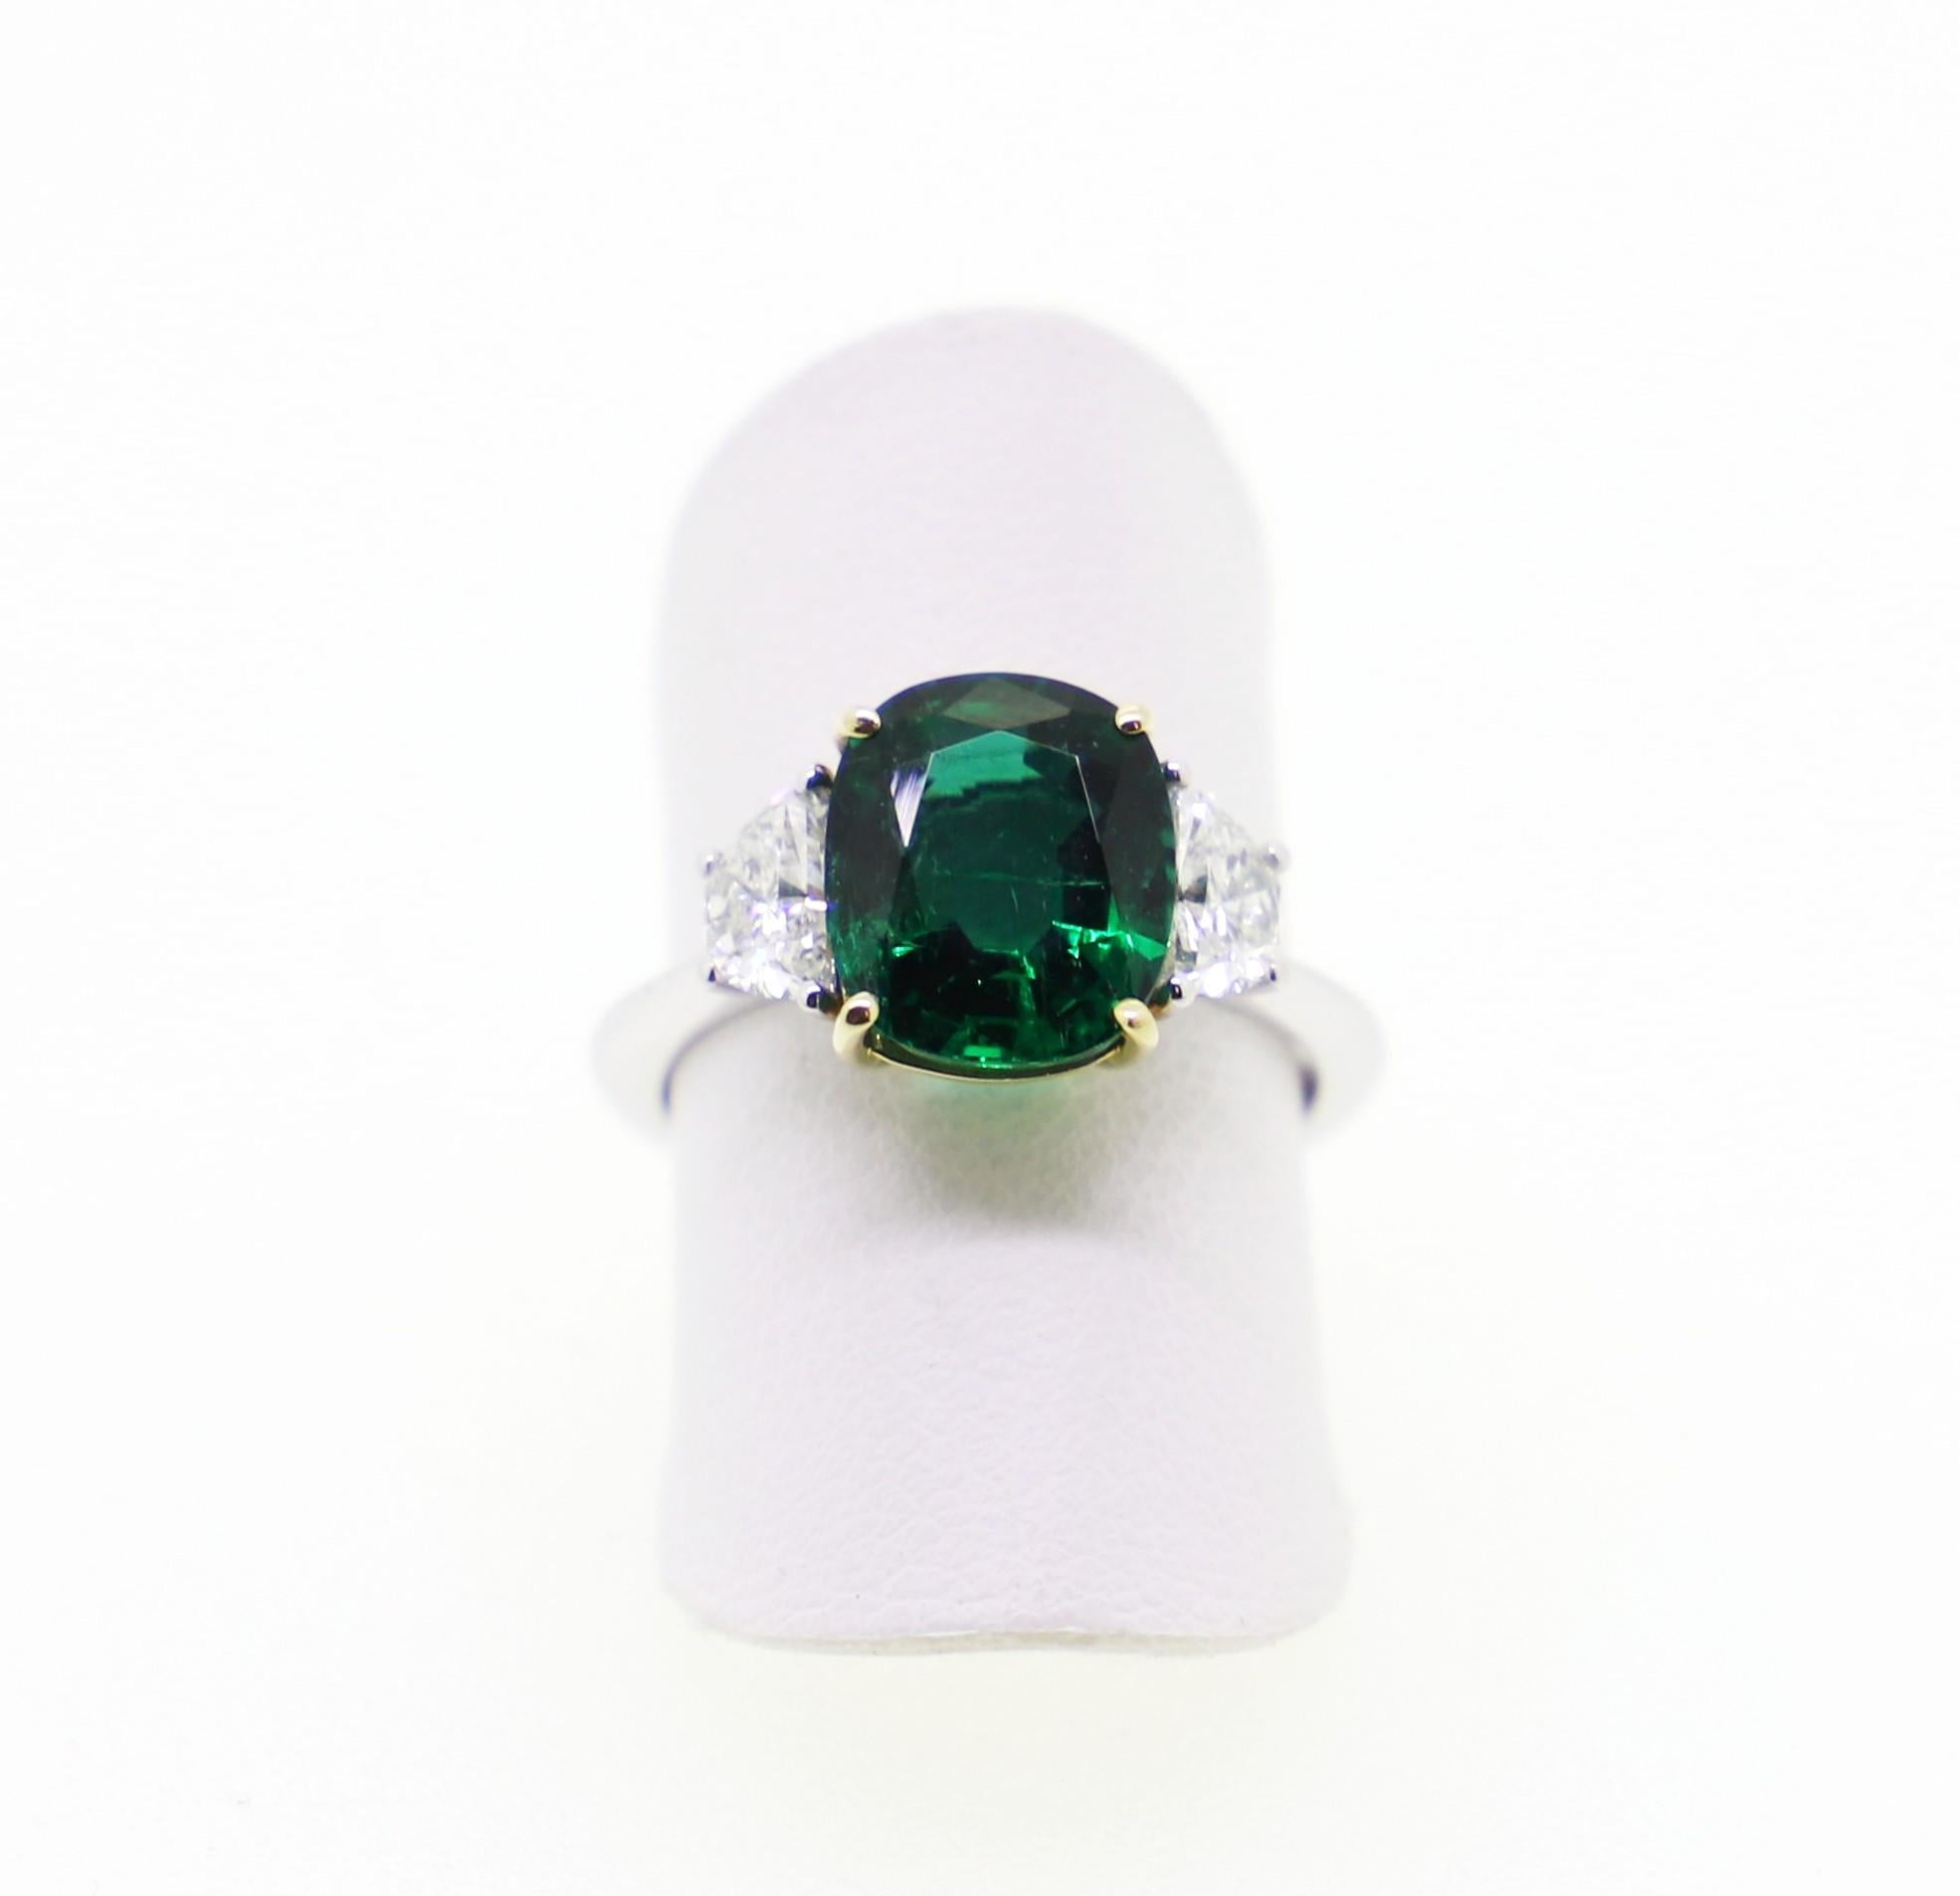 This Cocktail Ring is a great classic, and exactly for this reason it fits any outfit, with the sobriety and elegance of an everalsting design.
The Vivid Green Colour of the 3.08 Carat Oval Emerald is enhanced by the 2 Half-Moon Natural White